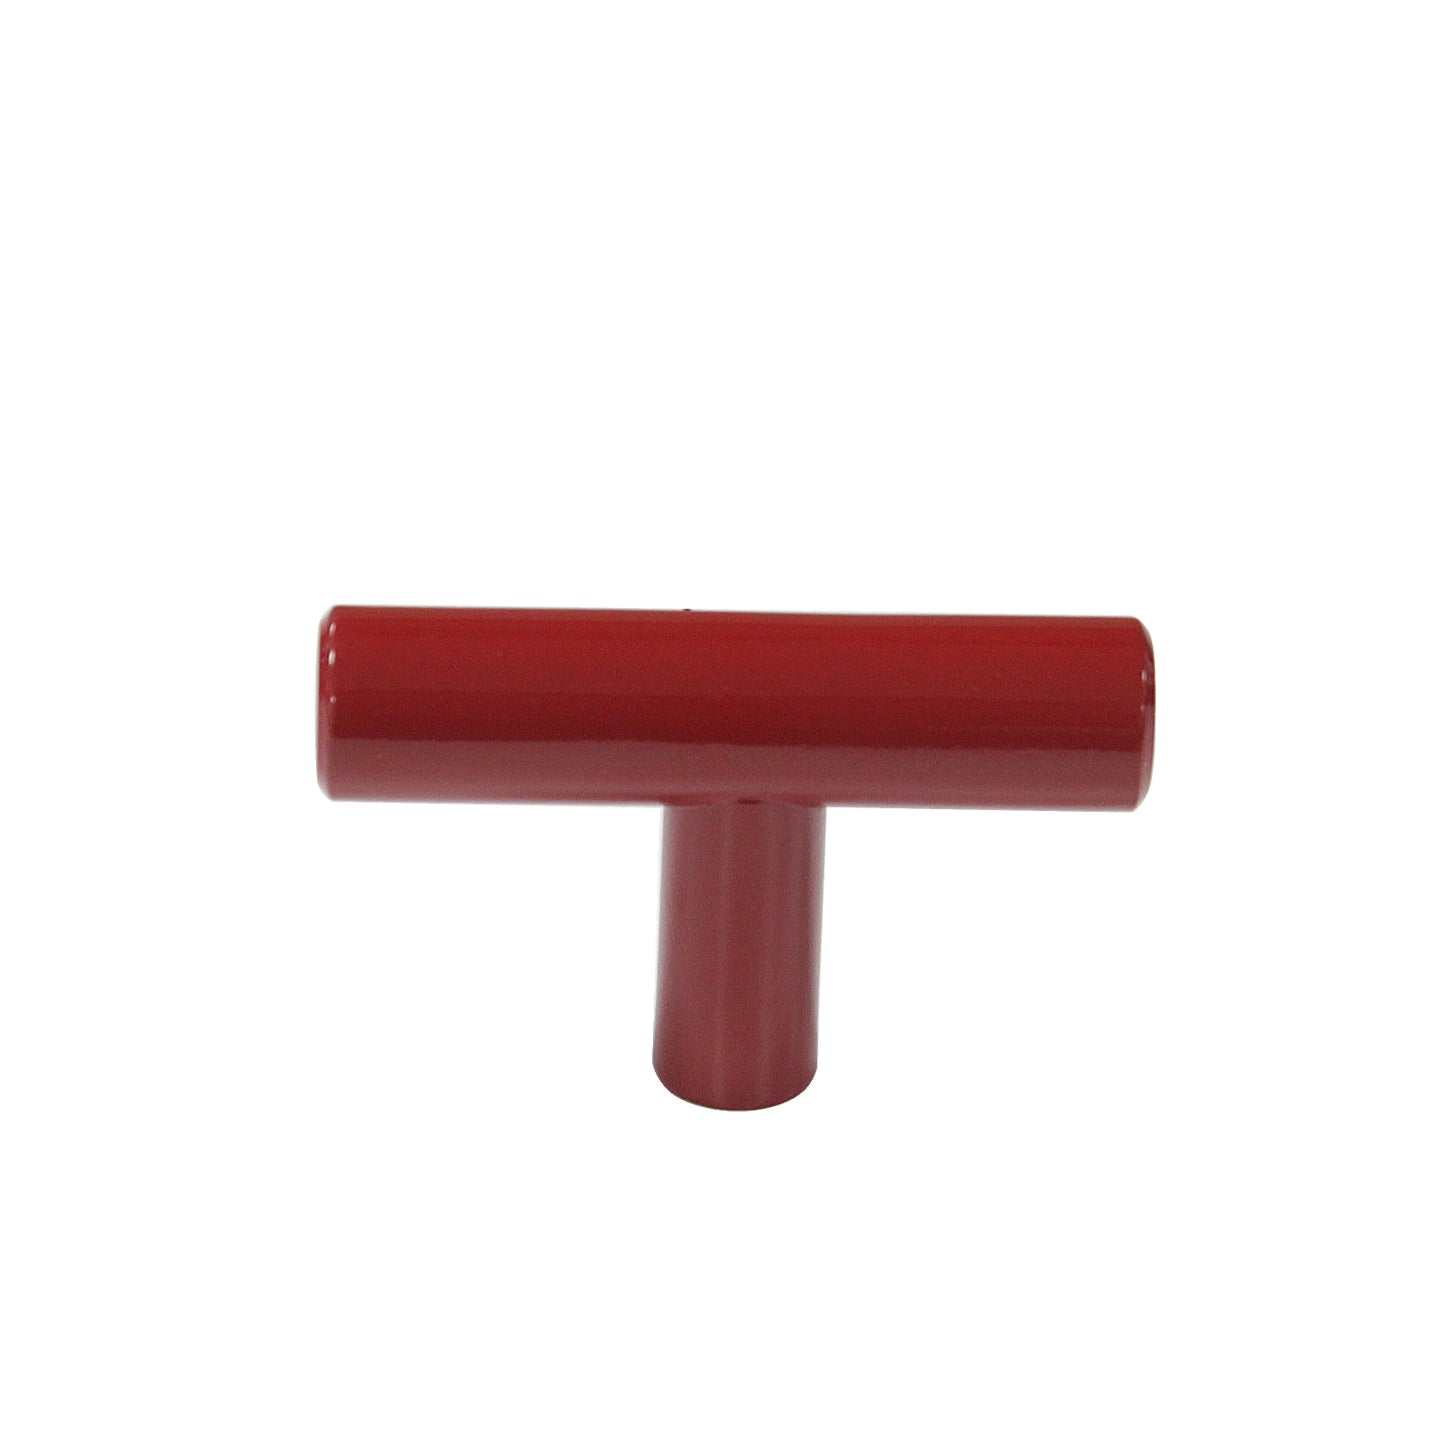 Stainless Steel T Bar Pulls Red Finish, Single Hole Handles 2inch Length - Probrico